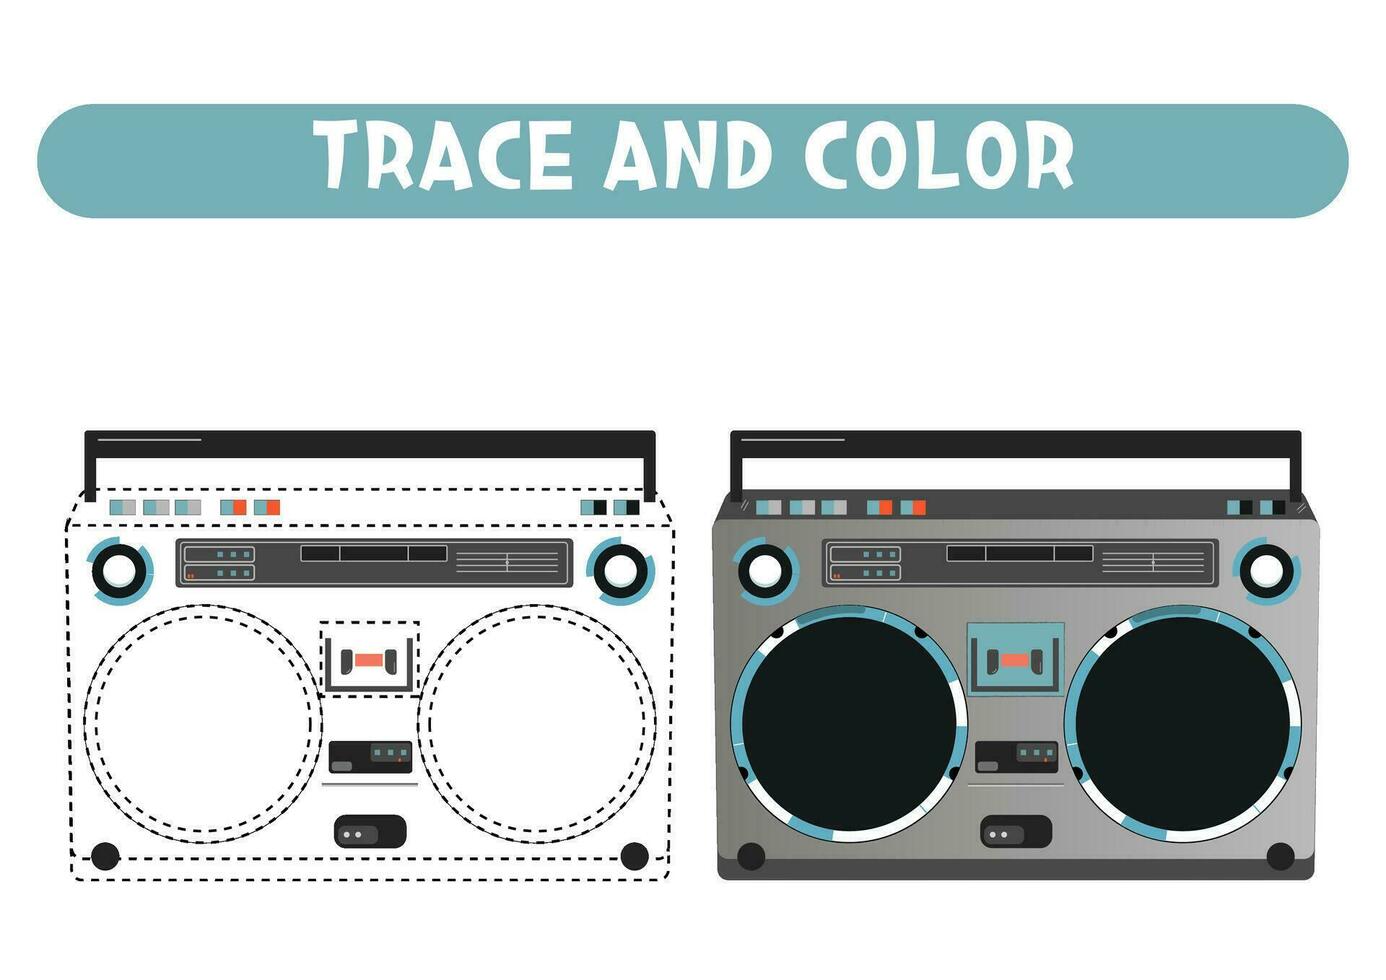 Trace and color retro boombox radio. Worksheet for kids vector